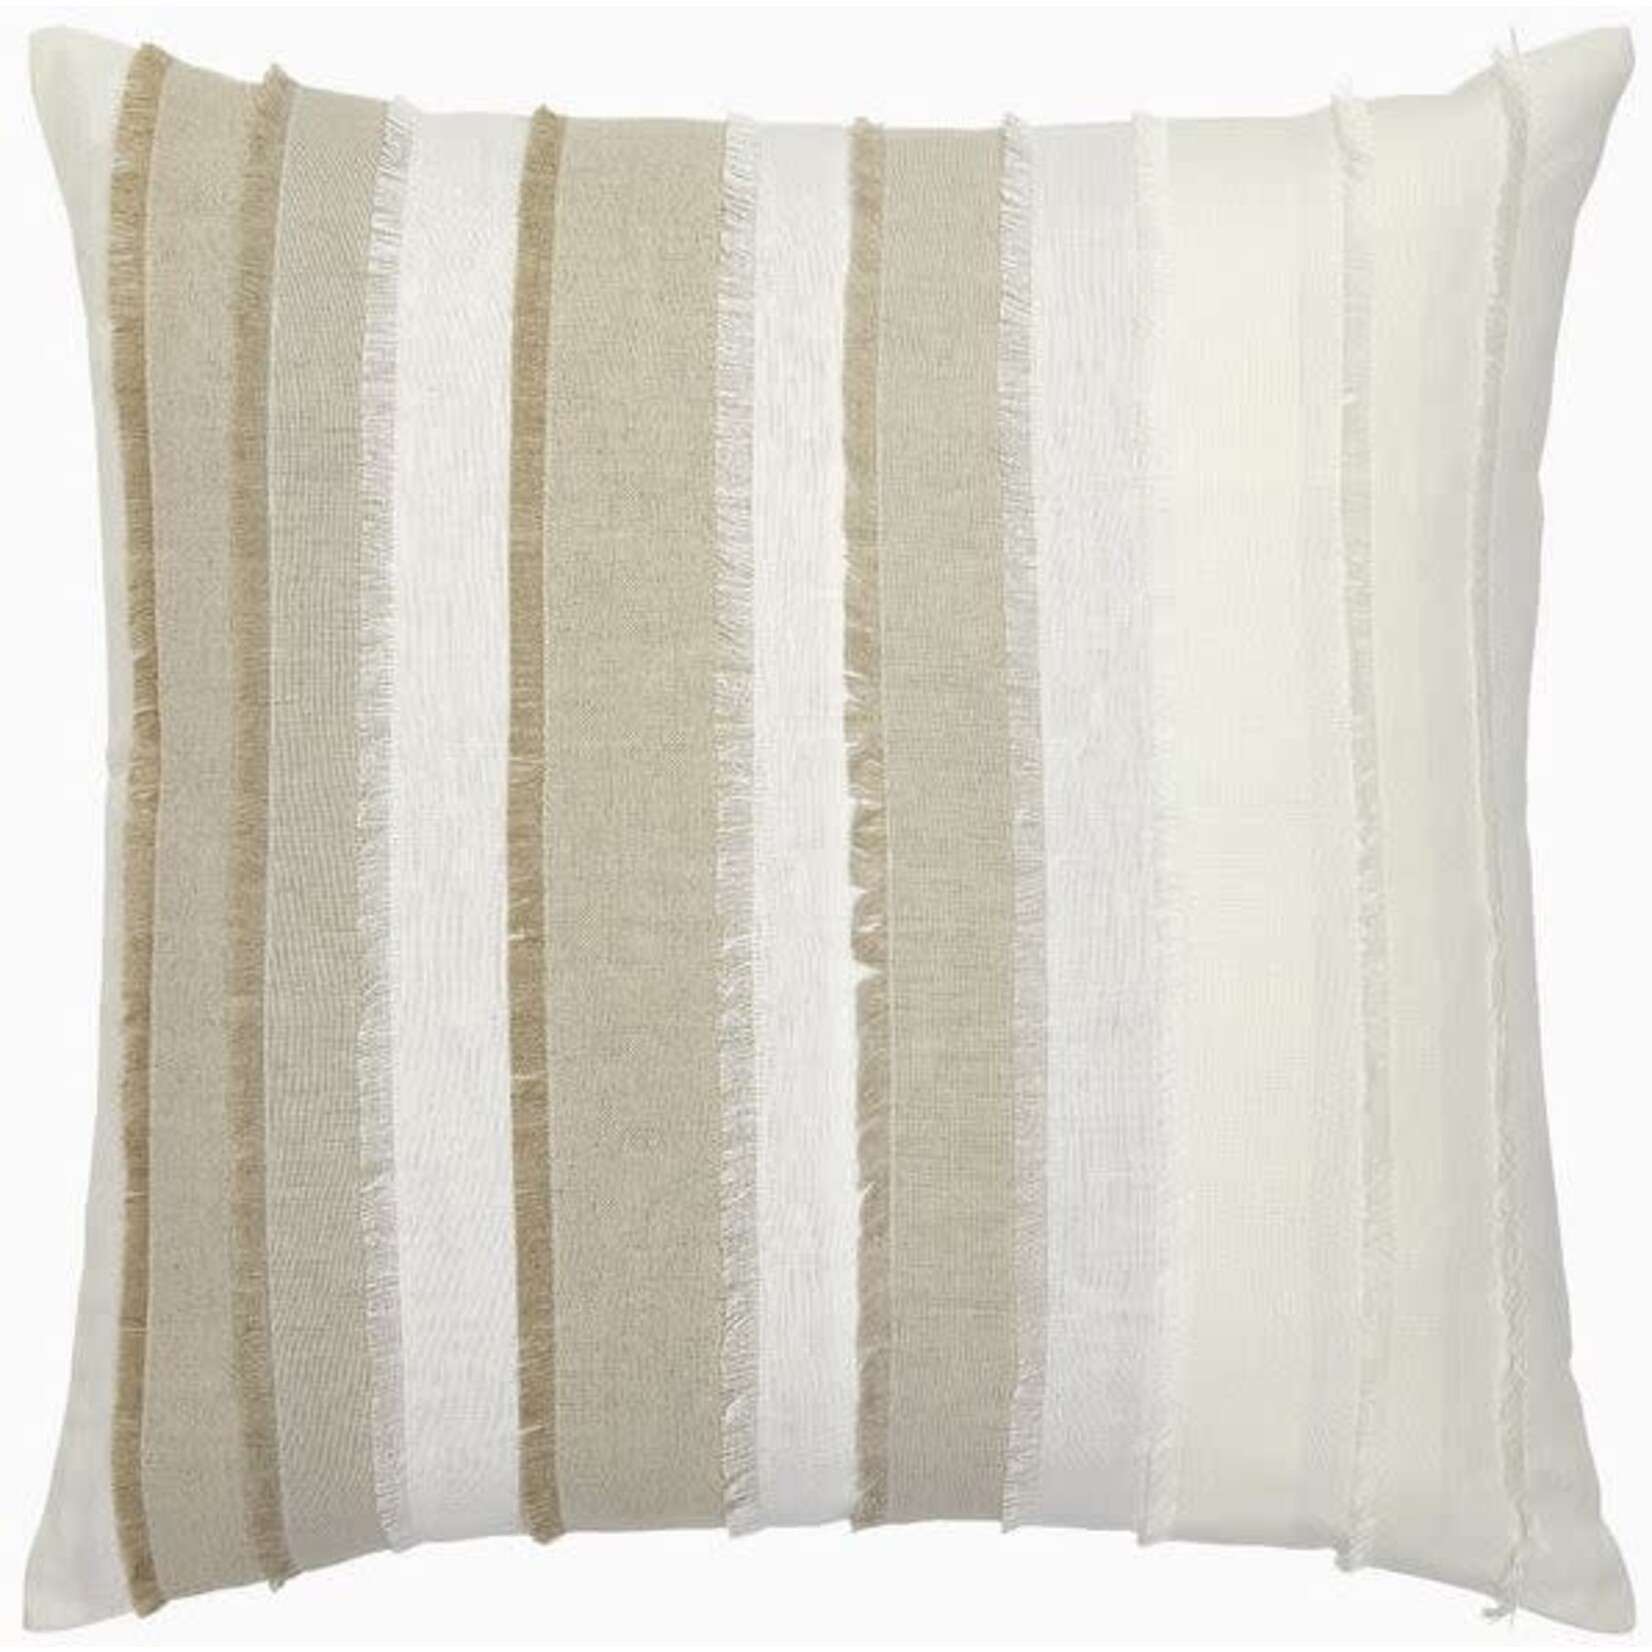 John Robshaw Textiles Fringed Natural Decorative Pillow with Insert 22x22